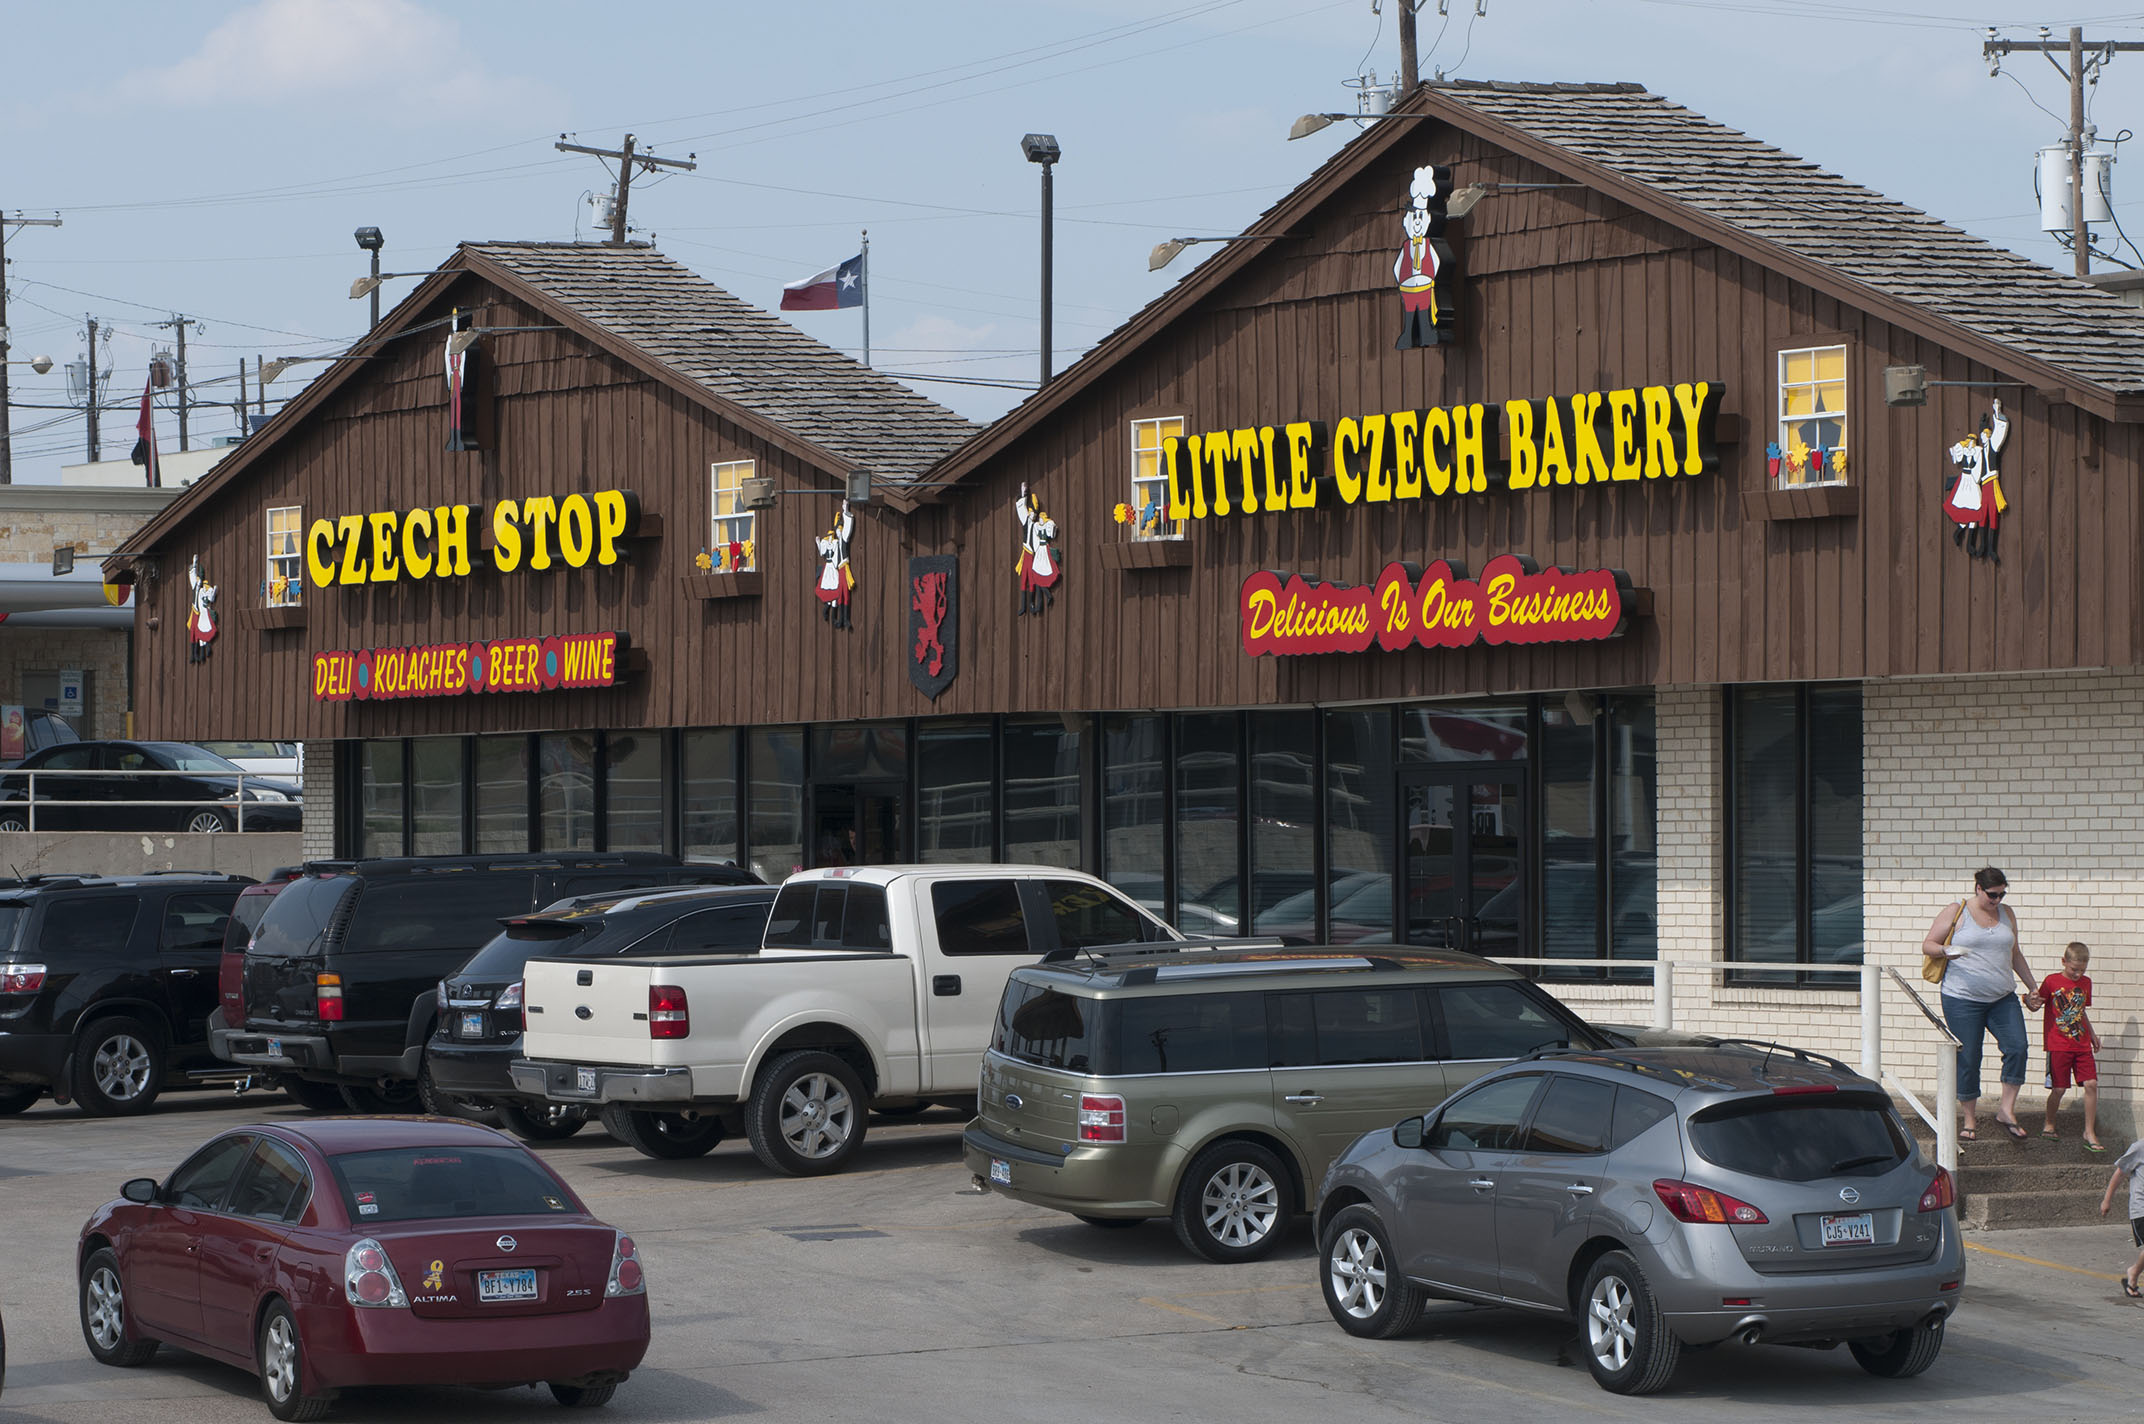 A view of the exterior of both Czech Stop and the Little Czech Bakery with a full parking lot.